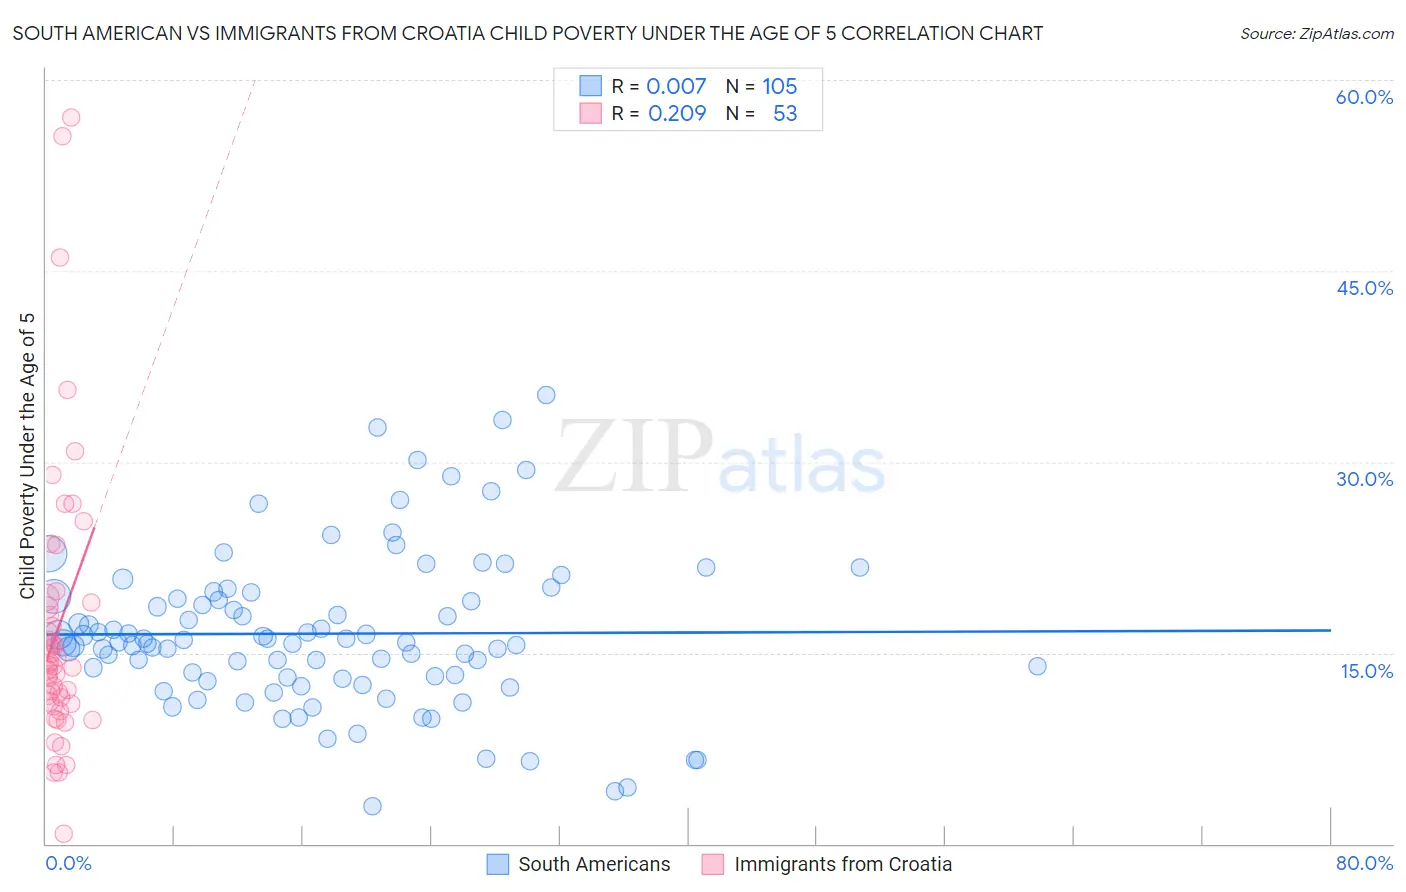 South American vs Immigrants from Croatia Child Poverty Under the Age of 5